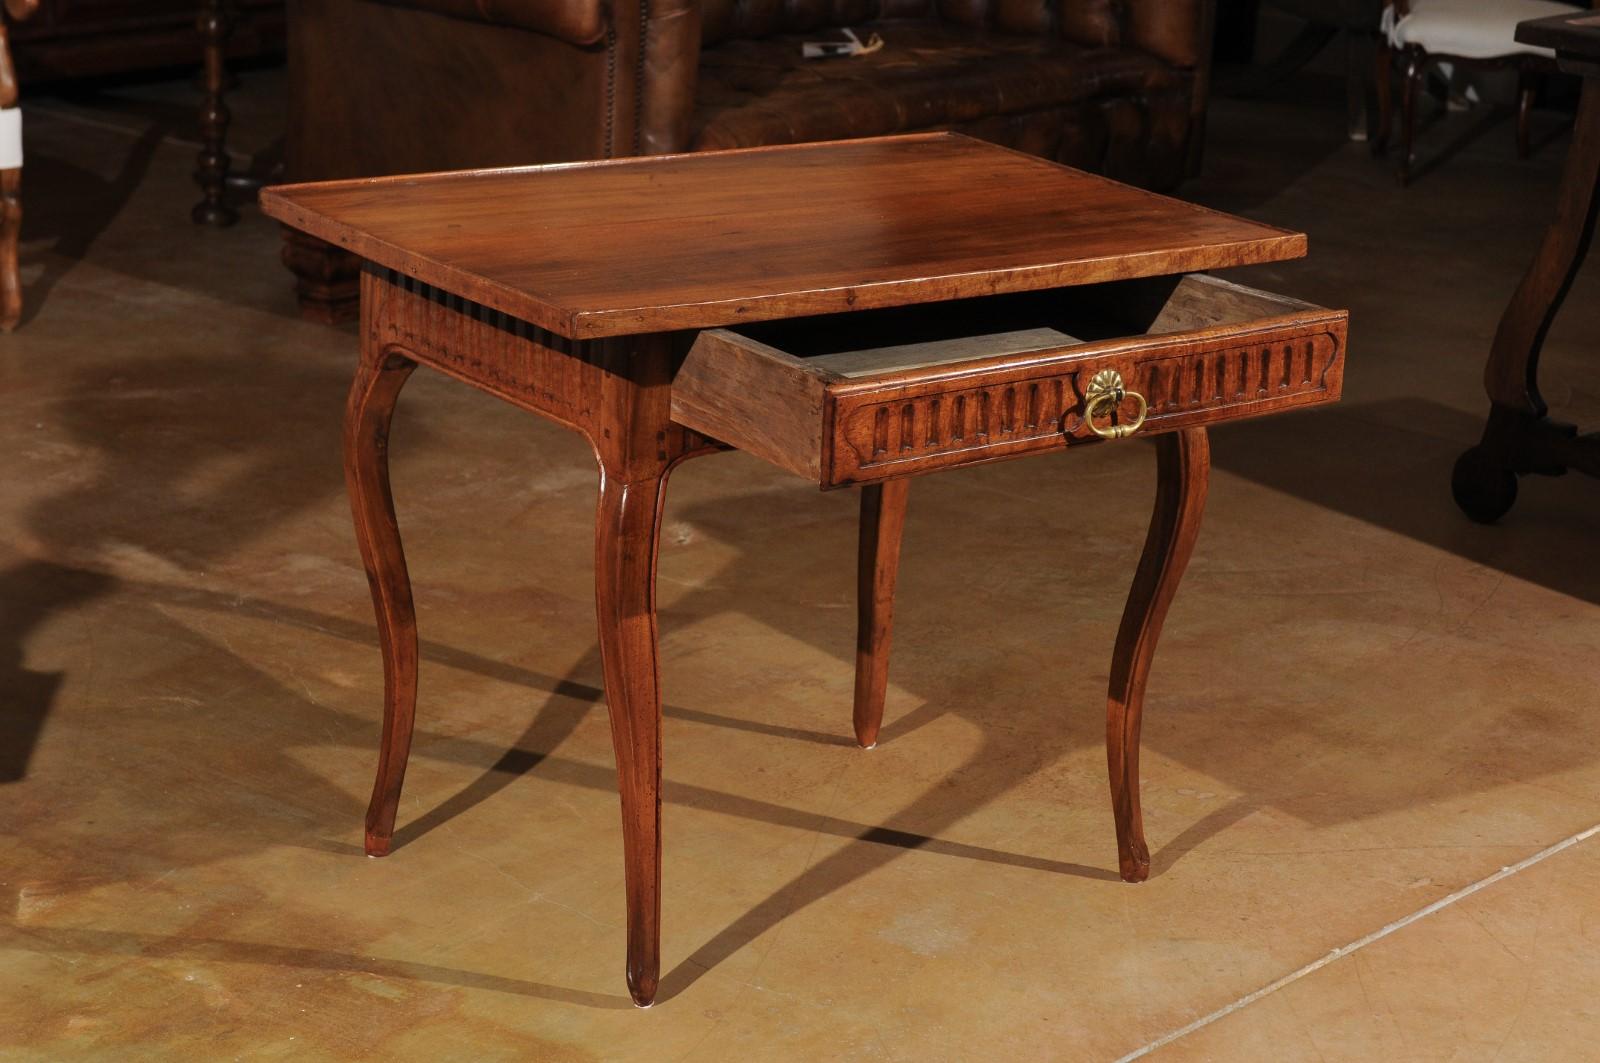 18th Century Southern French Transitional Walnut Side Table with Grooved Motifs, circa 1770